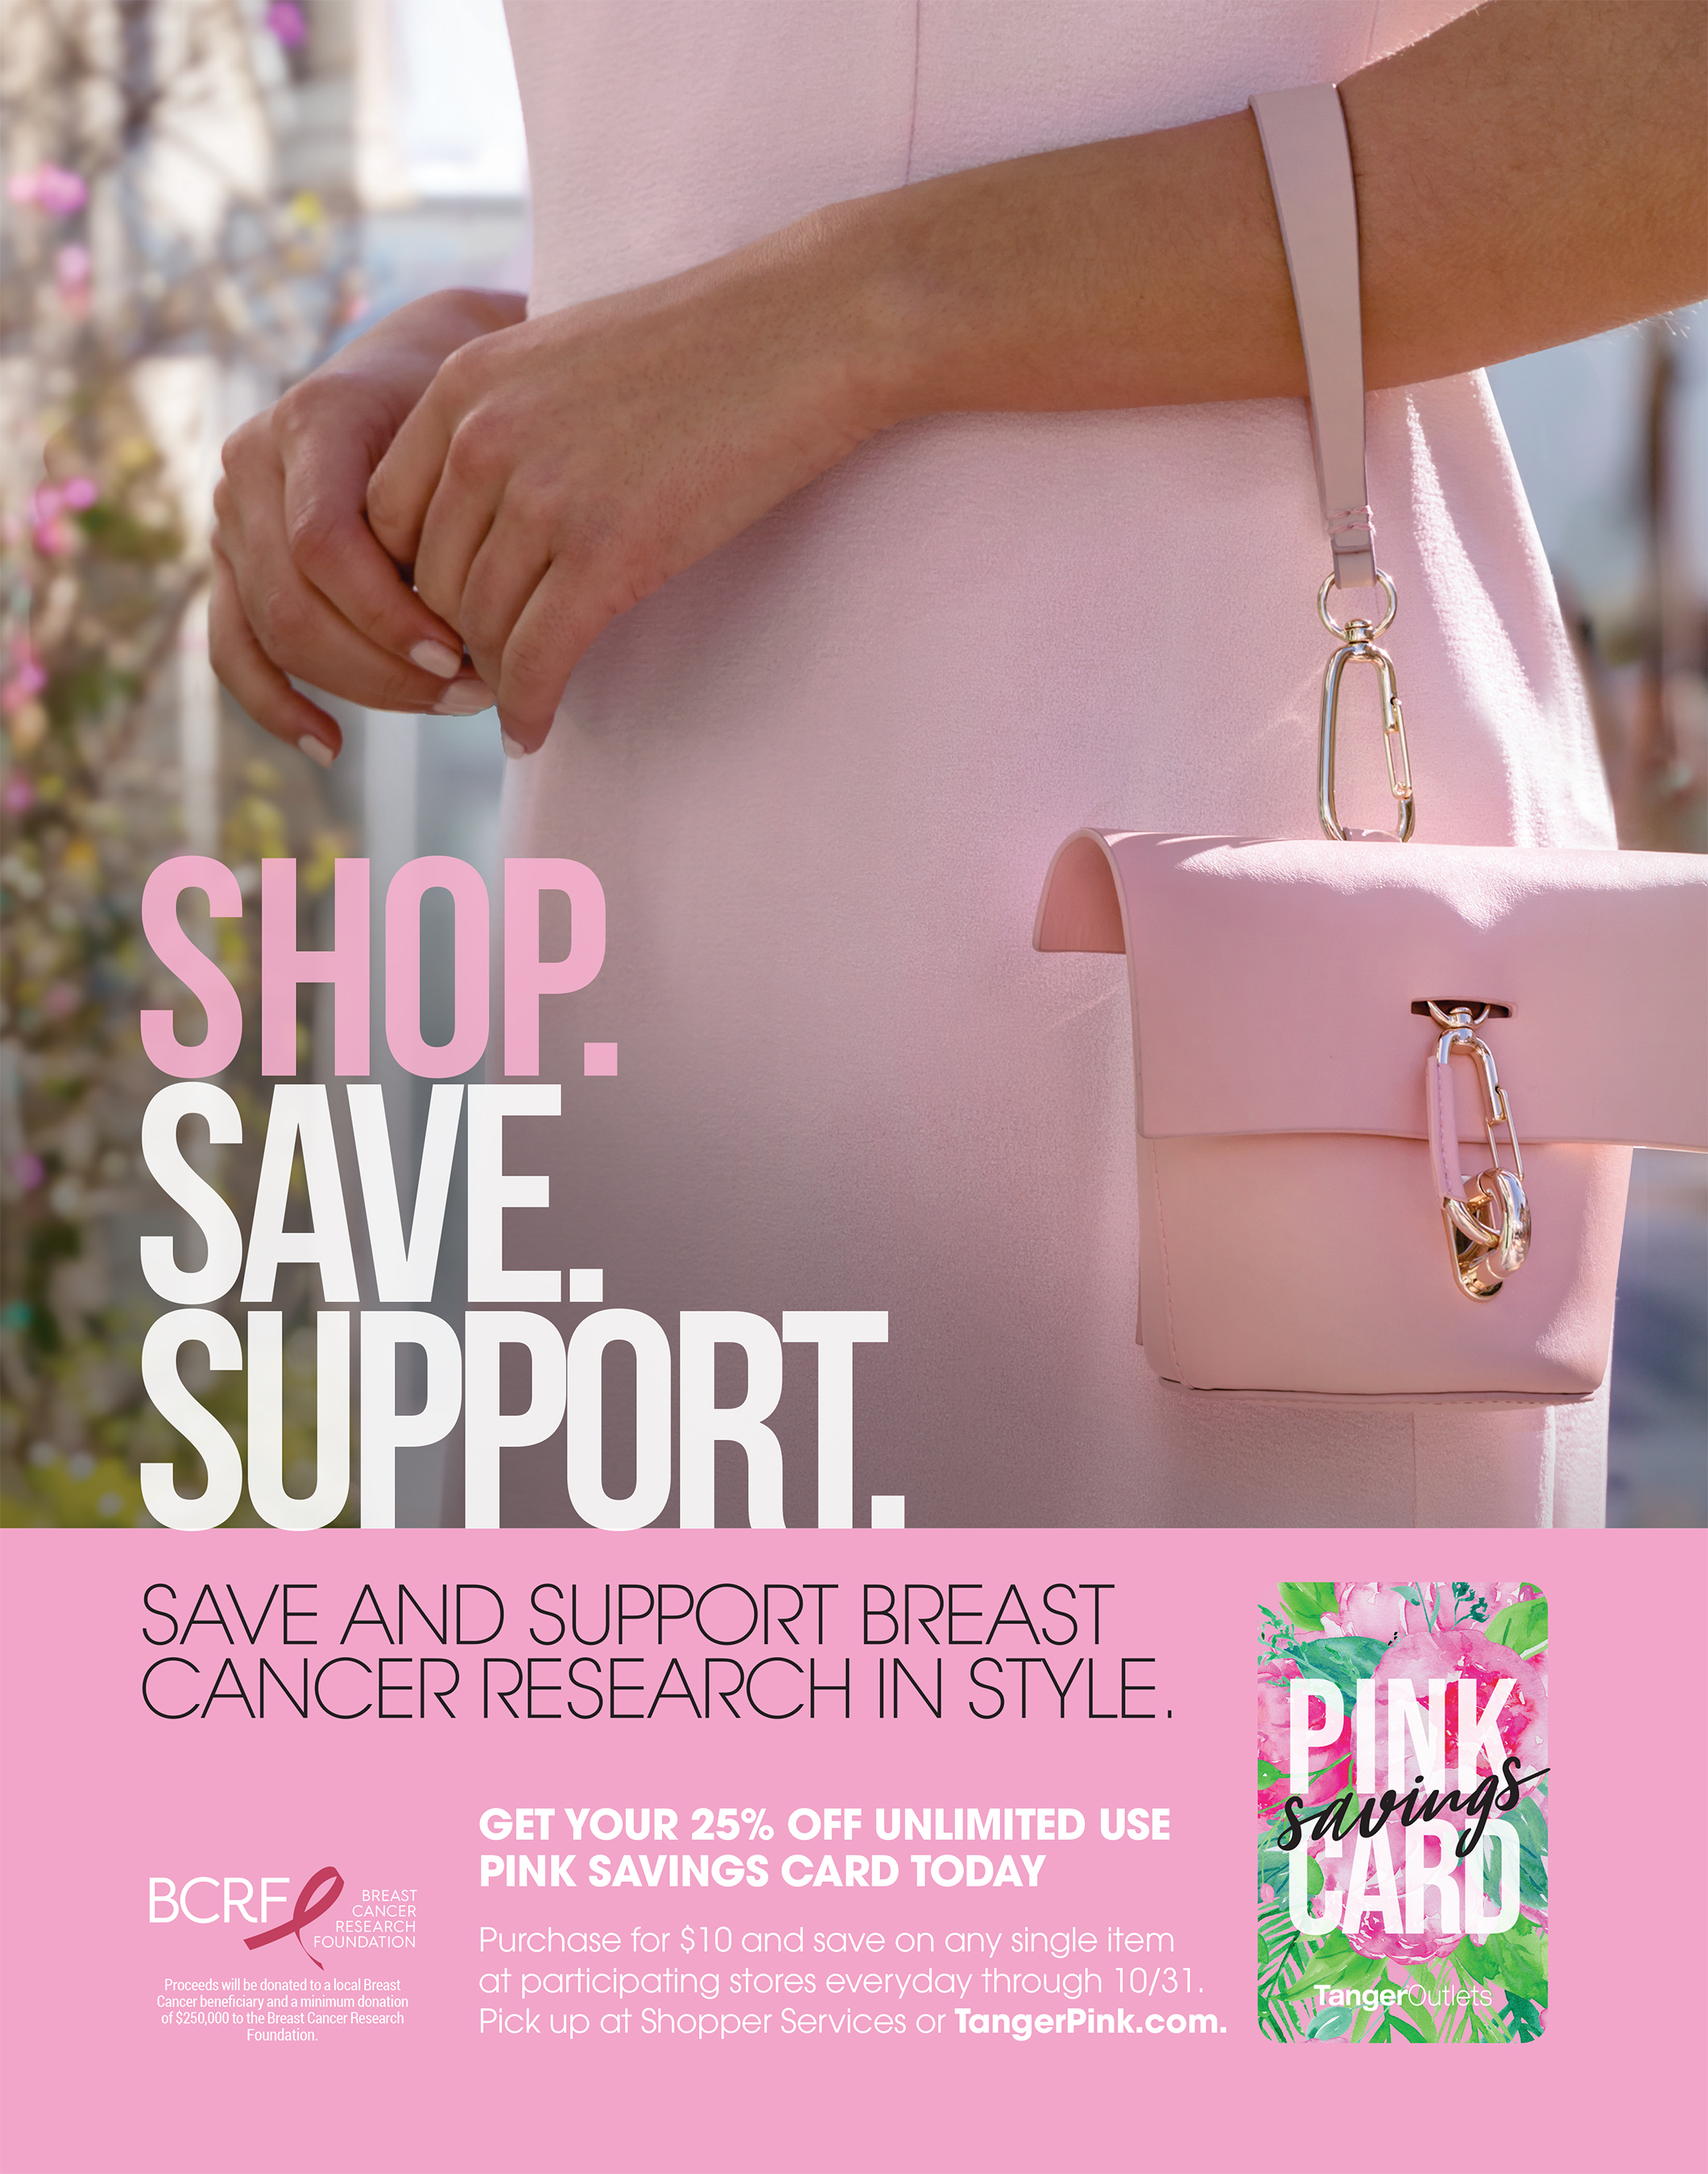 Contribute to breast cancer research in style